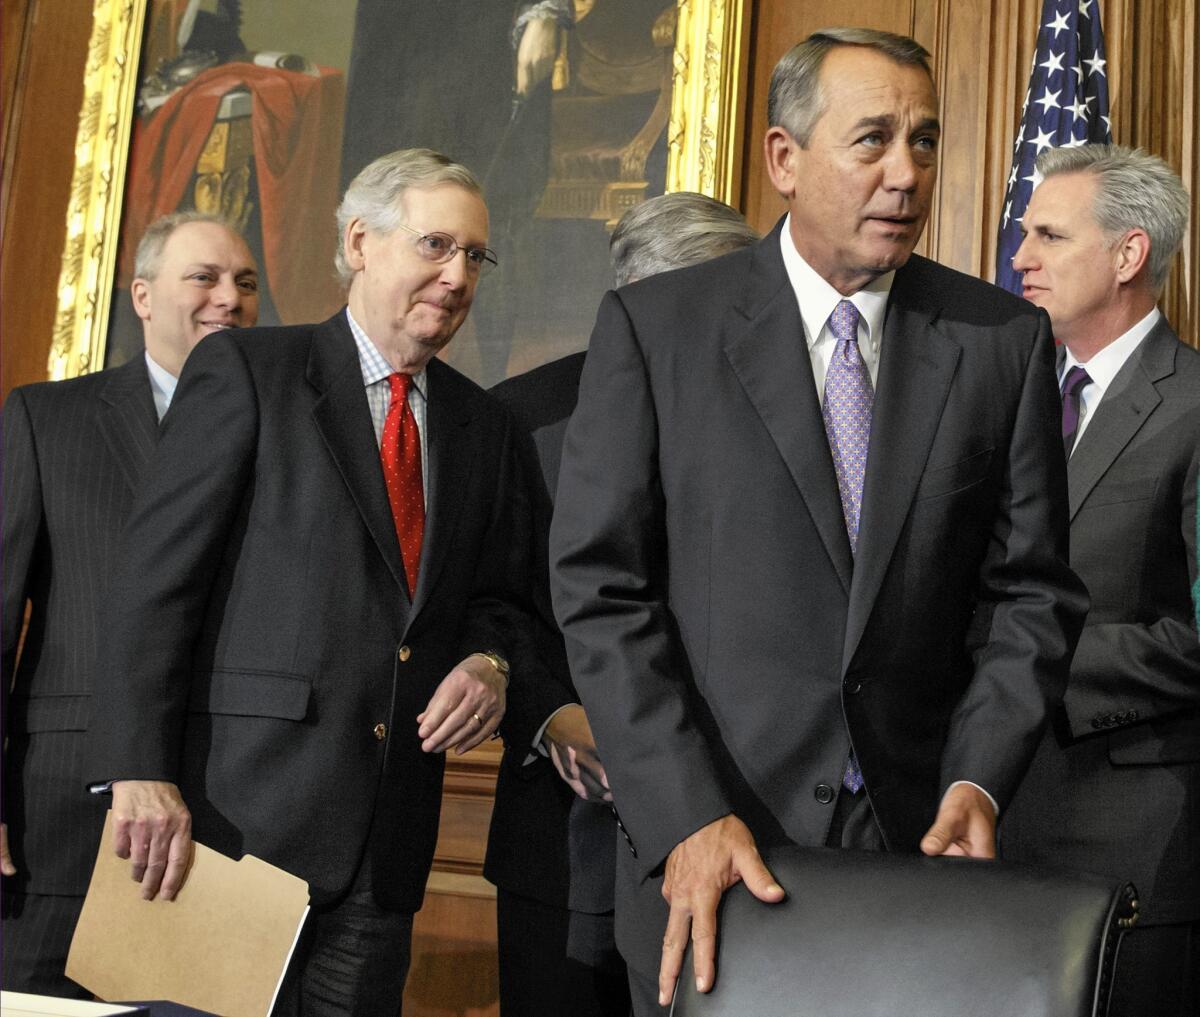 Republicans including Senate Majority Leader Mitch McConnell, second from left, and House Speaker John A. Boehner, second from right, have exchanged barbs over who is to blame for the impasse over Homeland Security funding.